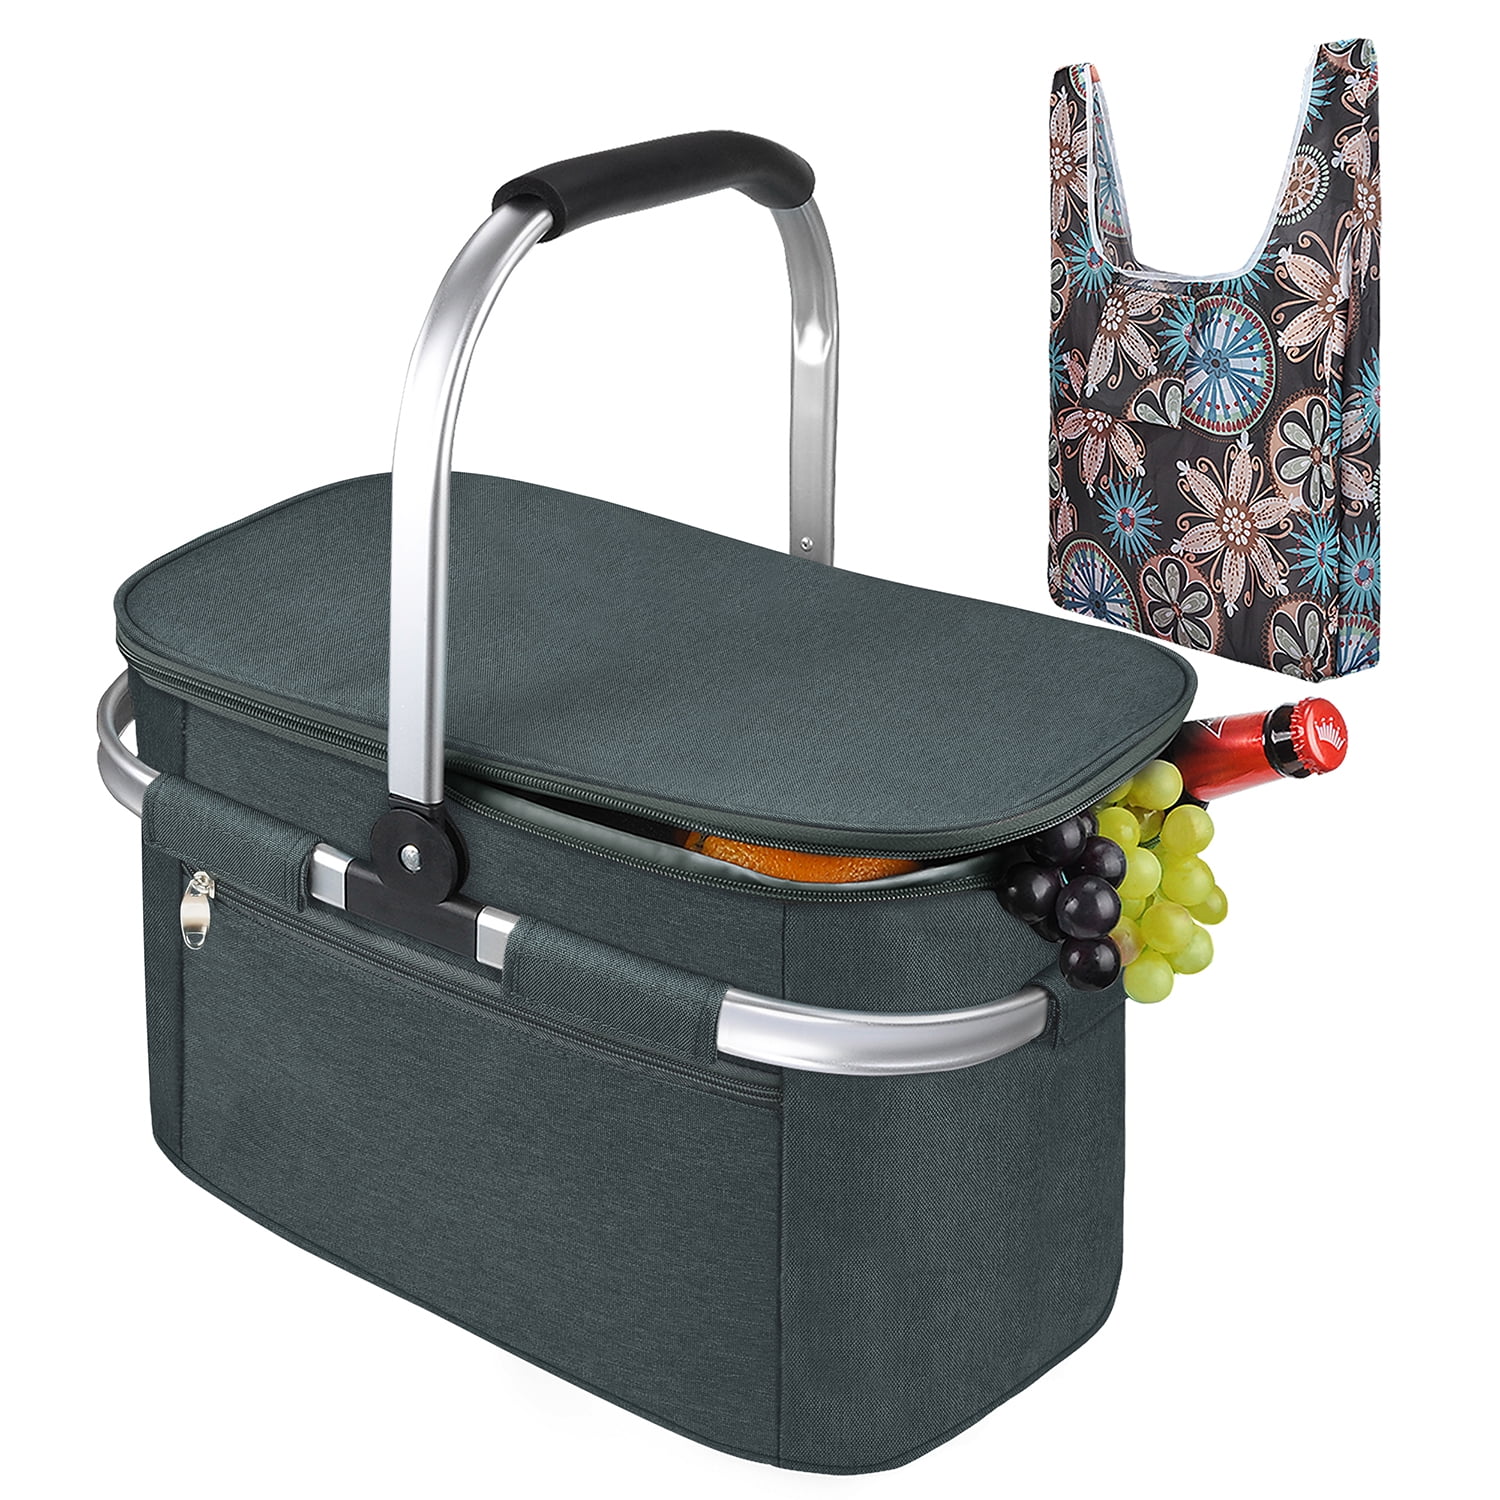 ALLCAMP Large Size Insulated Cooler Bag Folding Collapsible 22L Picnic Basket with Sewn in Frame Grey 